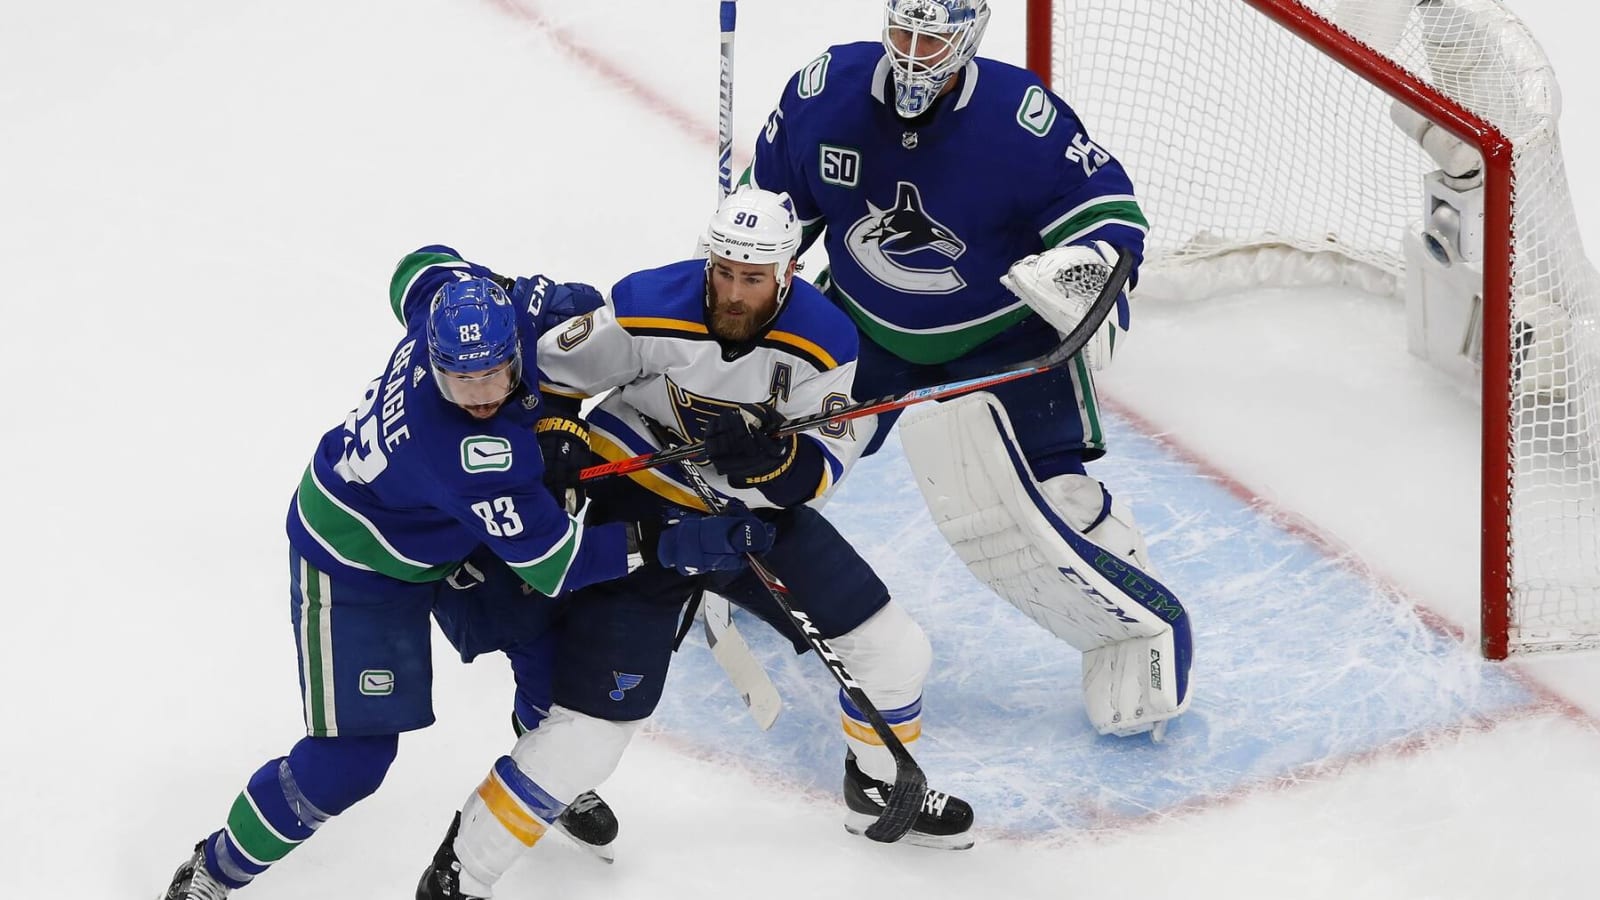 On this day in 2020, the Canucks eliminated the St. Louis Blues from the Stanley Cup Playoffs